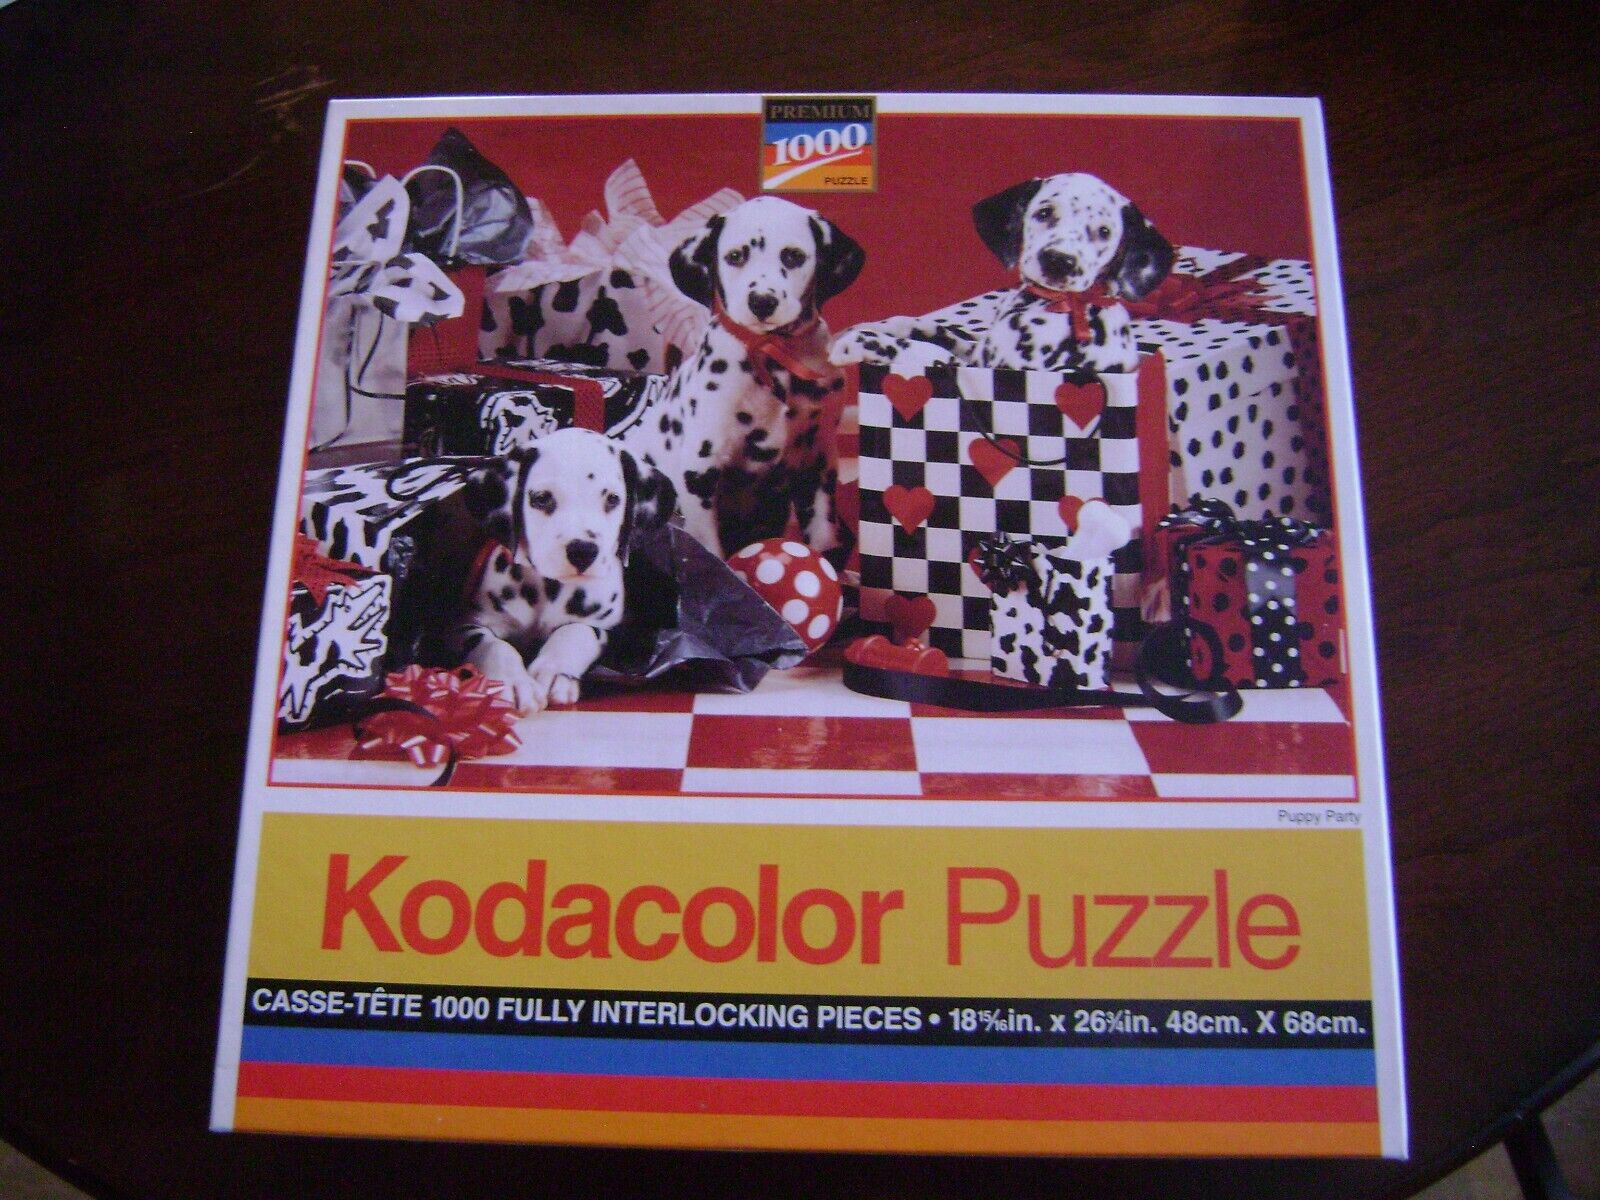 1000 piece Kodacolor Jigsaw Puzzle Puppy Selling rankings Party sealed new Brand Austin Mall